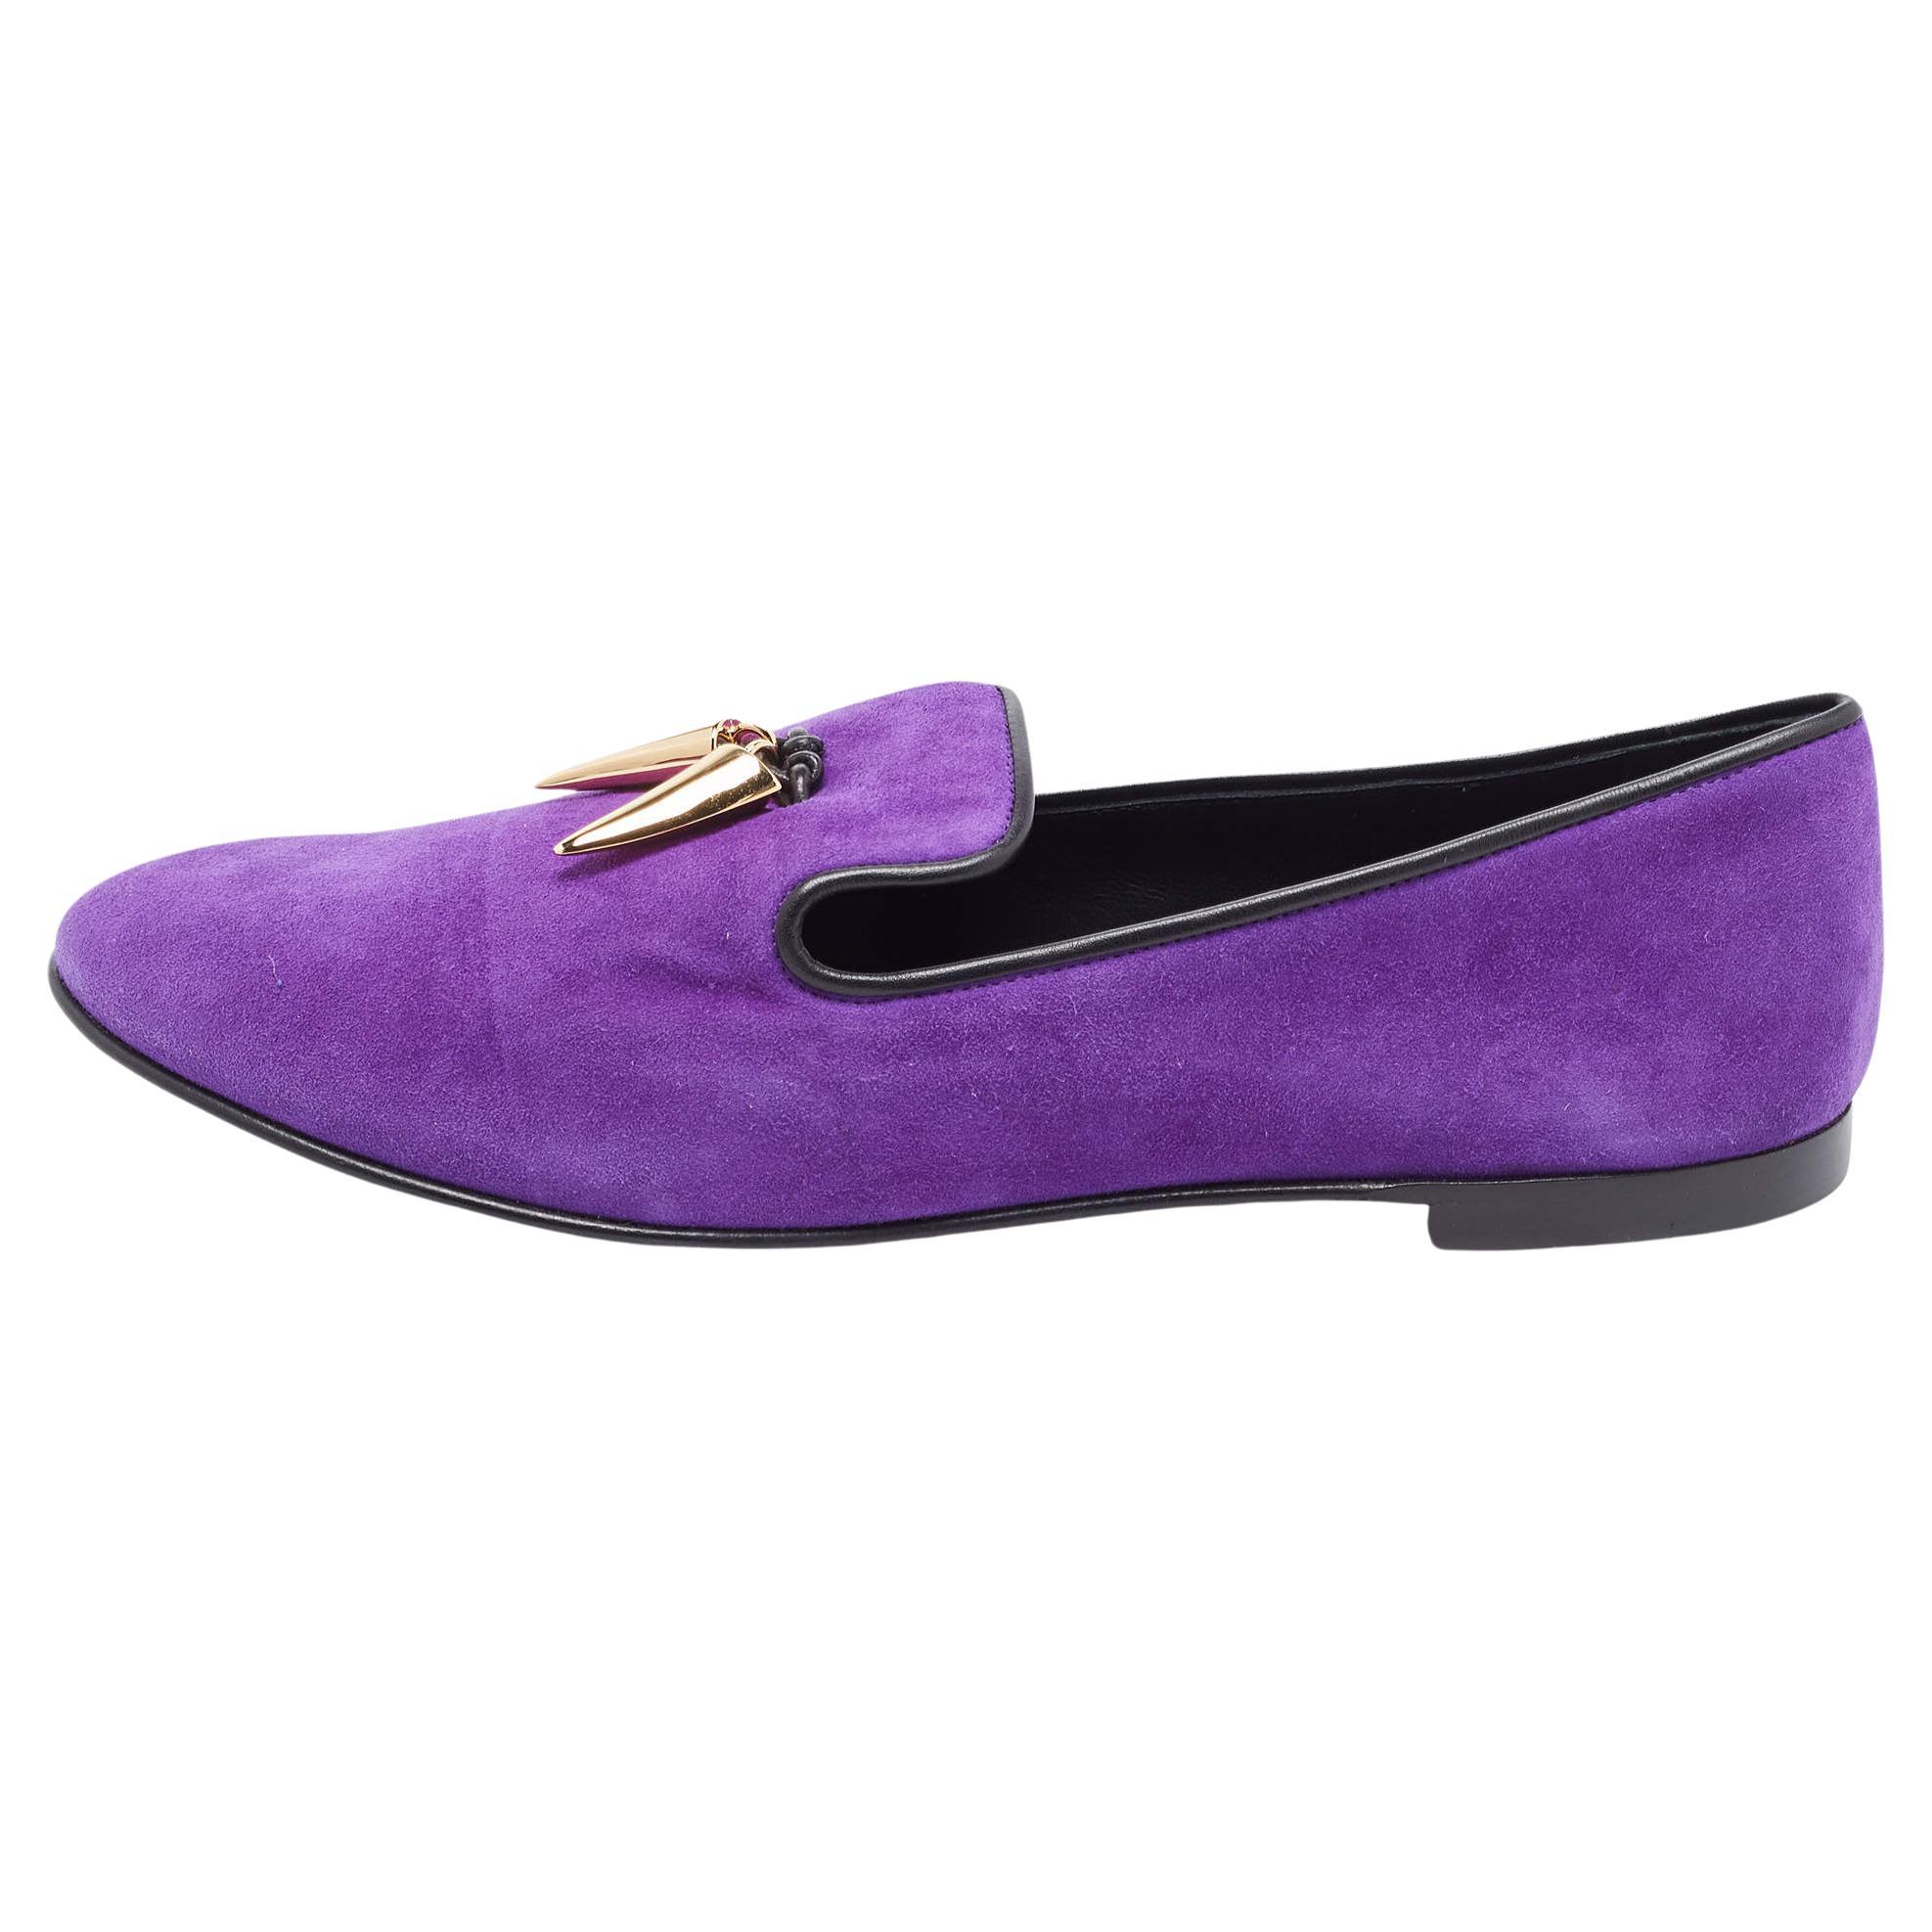 Giuseppe Zanotti Purple Suede Kevin Shark Tooth Tassel Smoking Slippers Size 41 For Sale